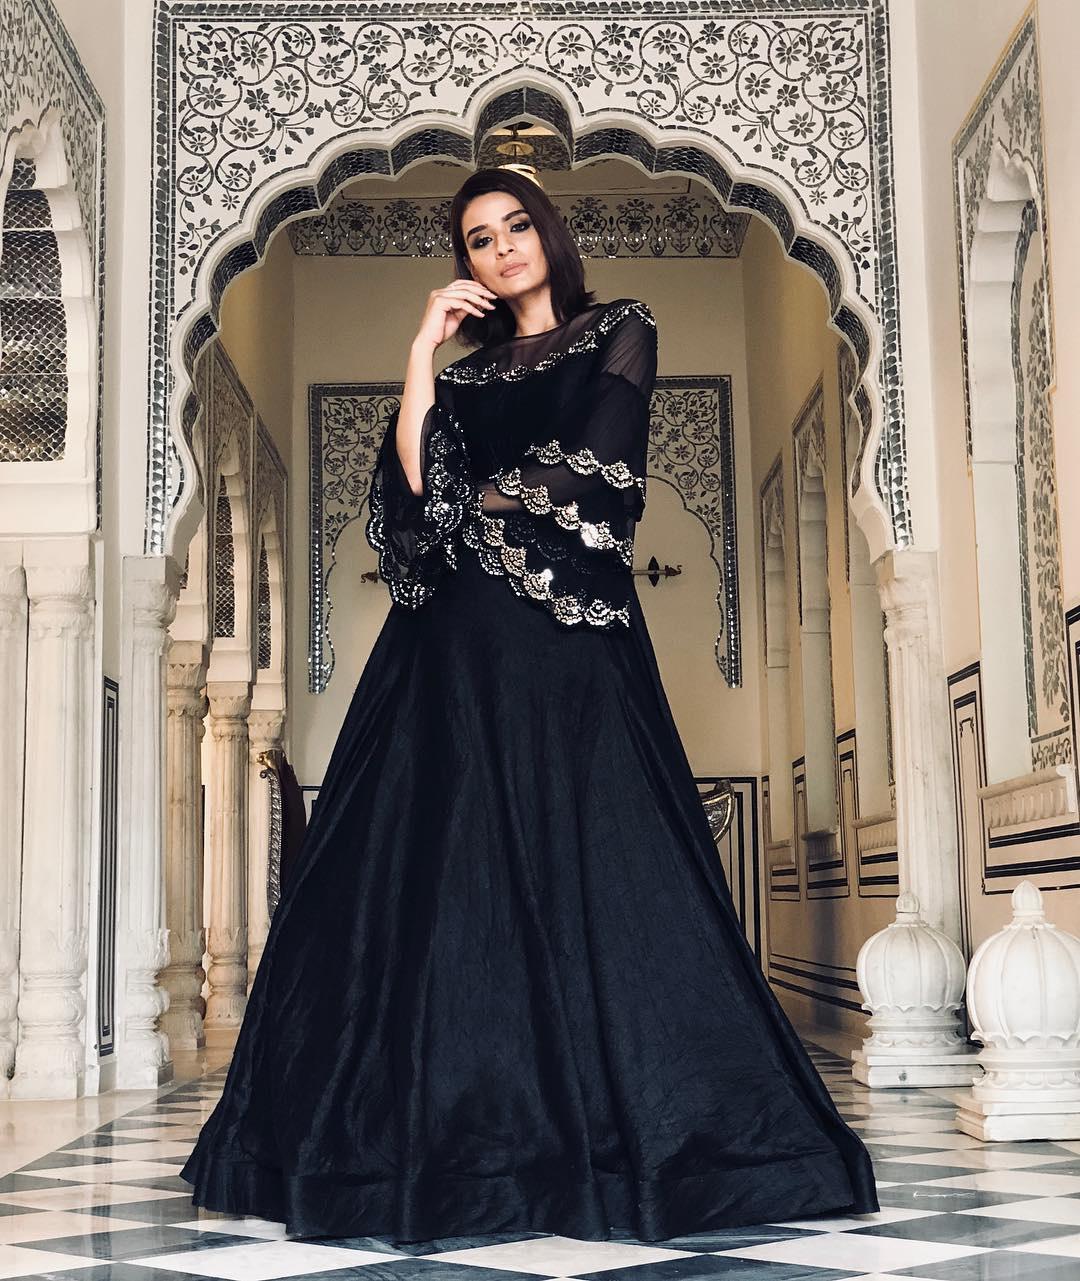 From Kiara Advani to Suhana Khan, celebrities embraced saris to mermaid-style  dresses in the best fashion Instagrams of the week | Vogue India